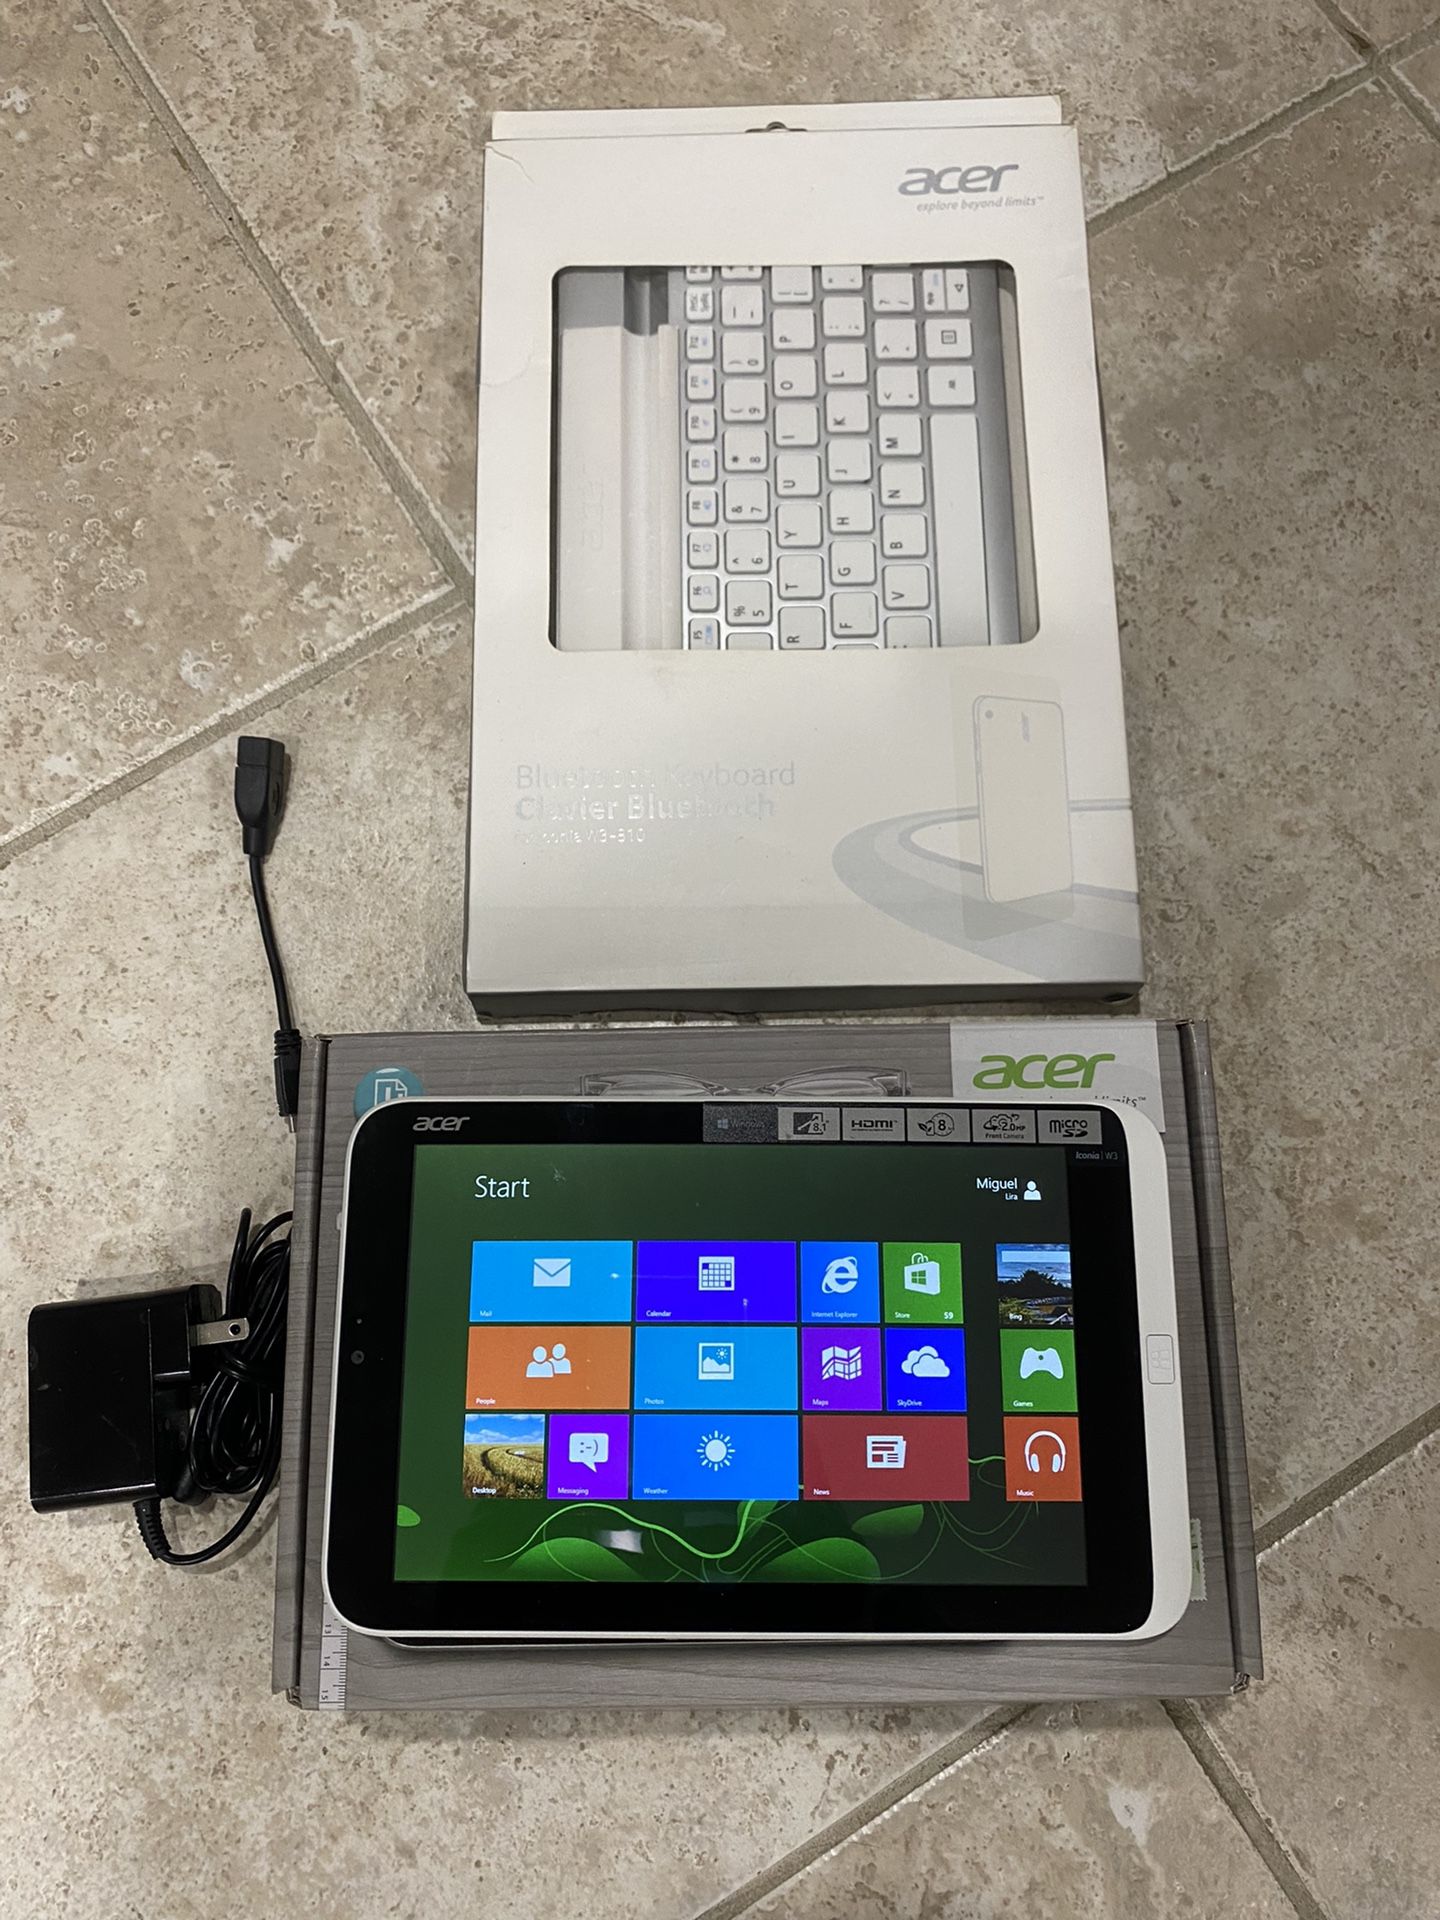 Acer Iconia W3 Windows Tablet